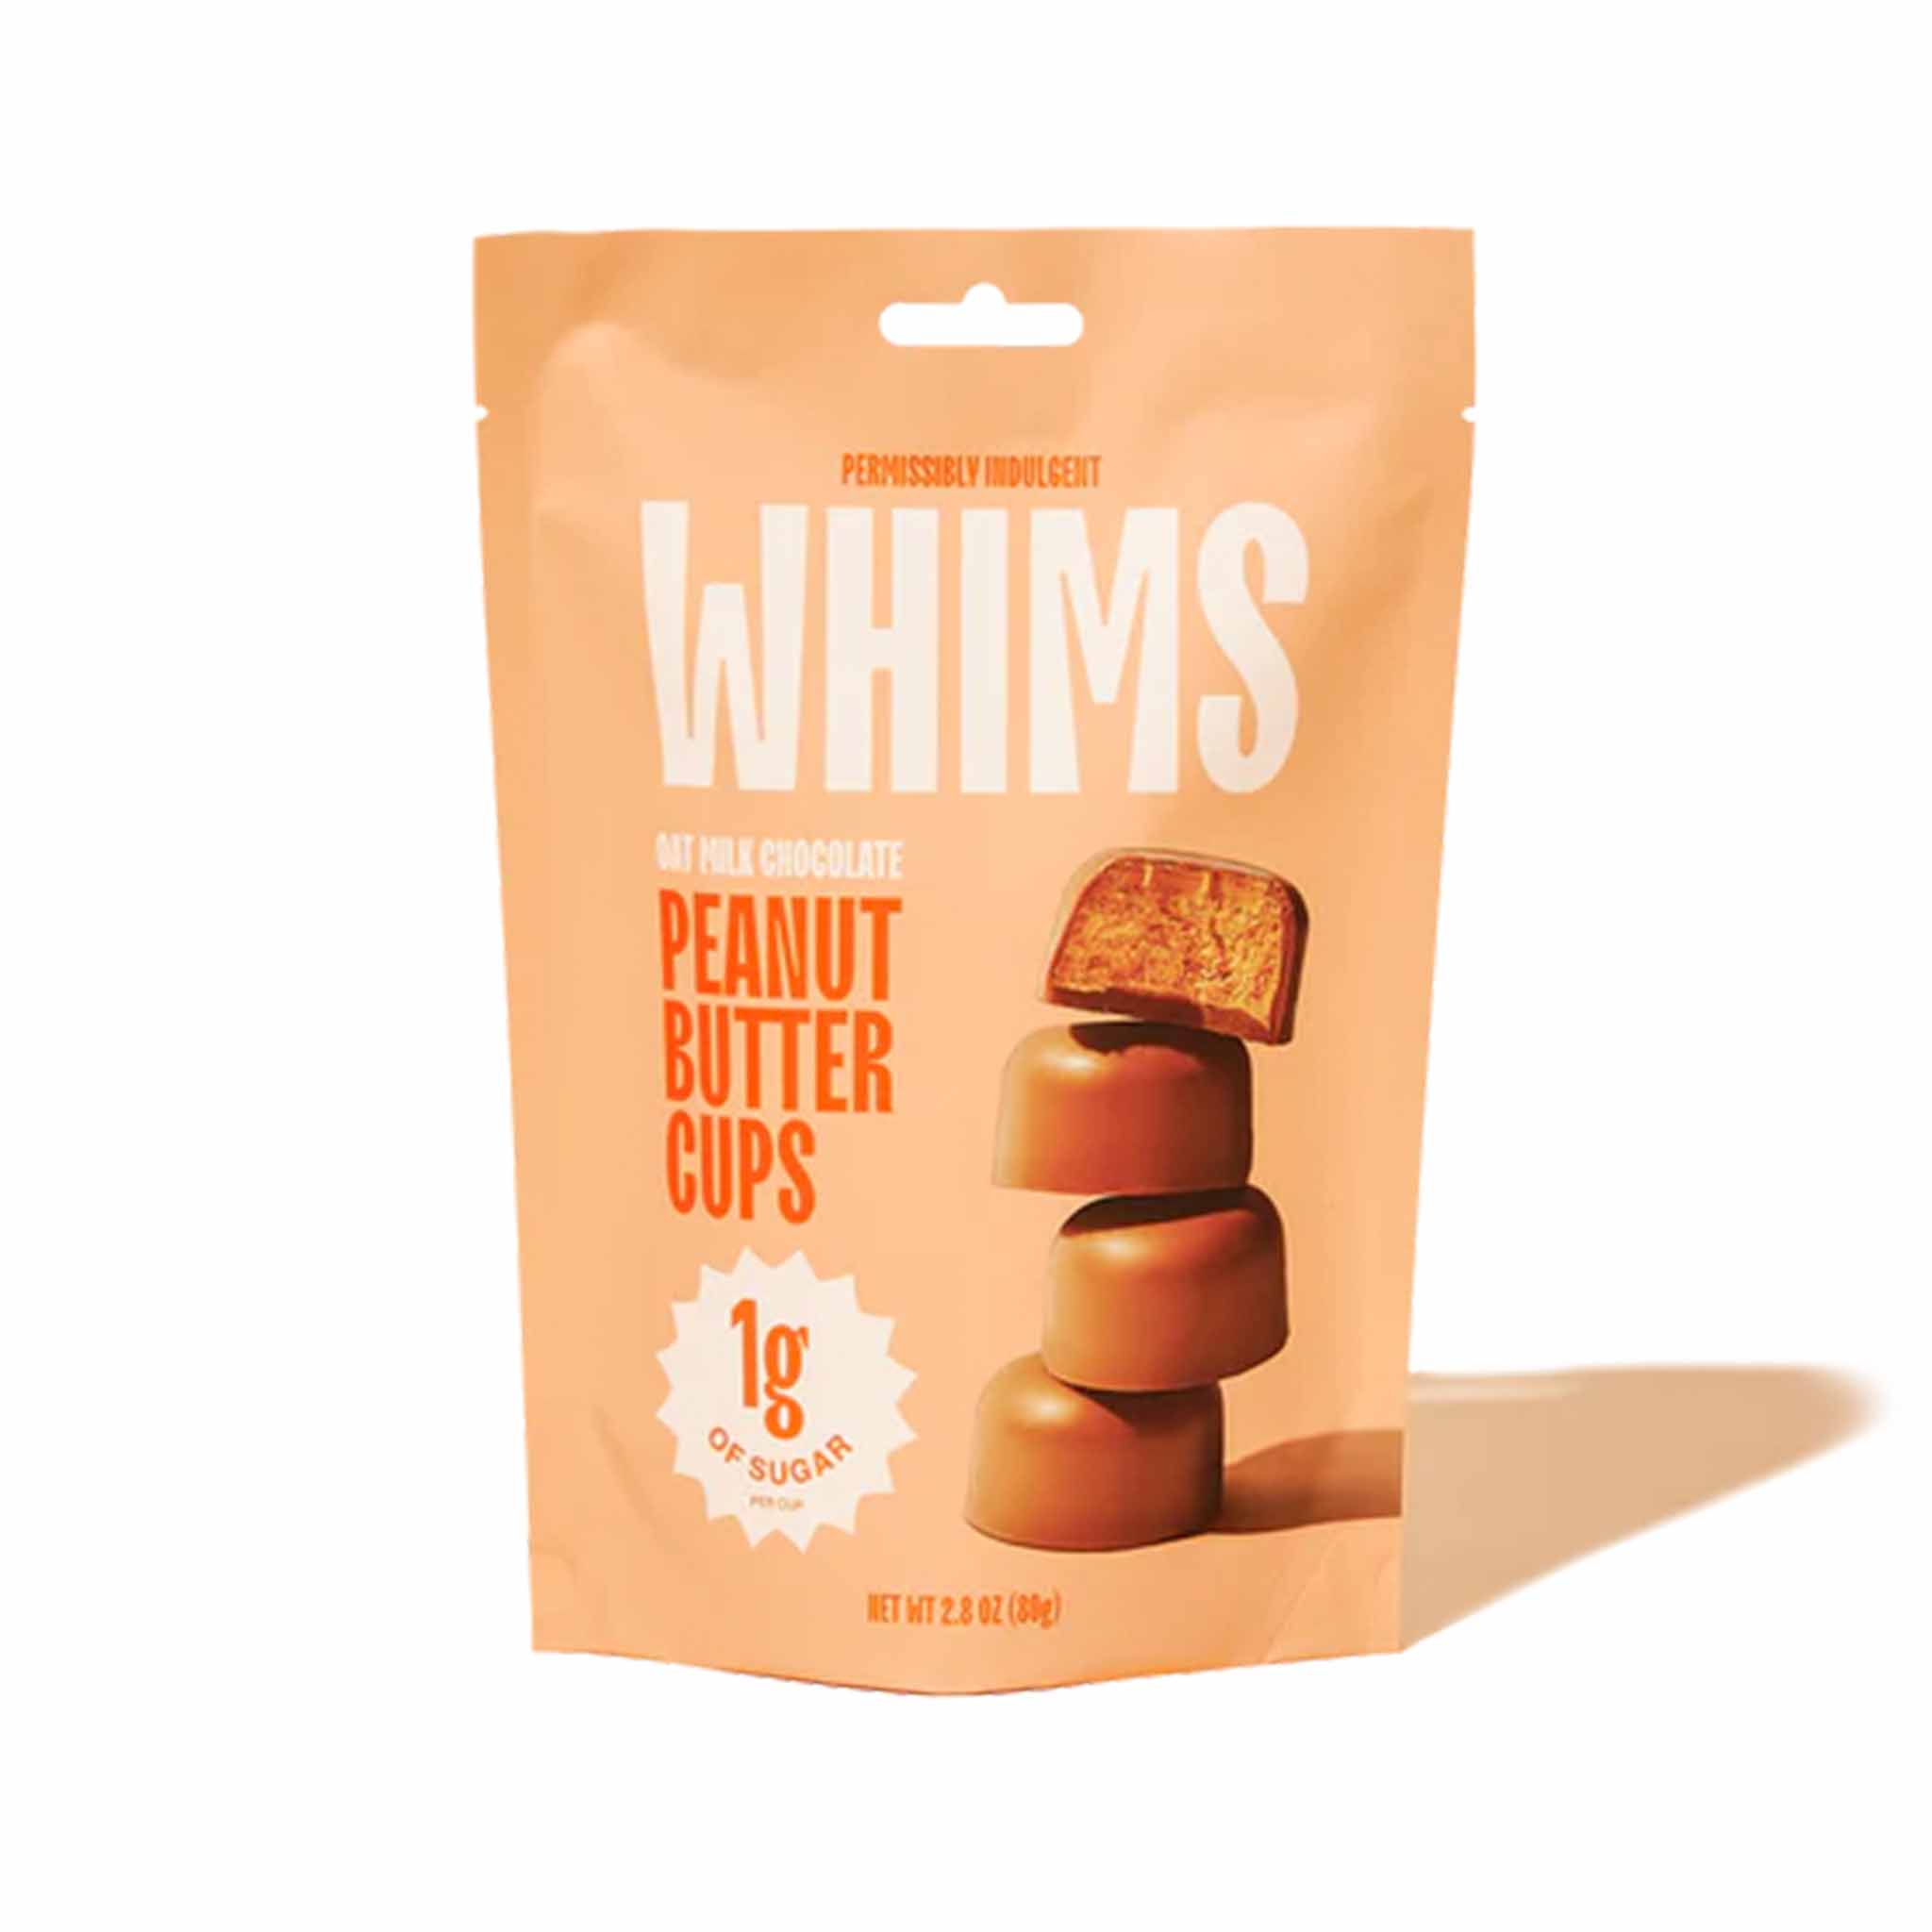 WHIMS PEANUT BUTTER CUPS 80g